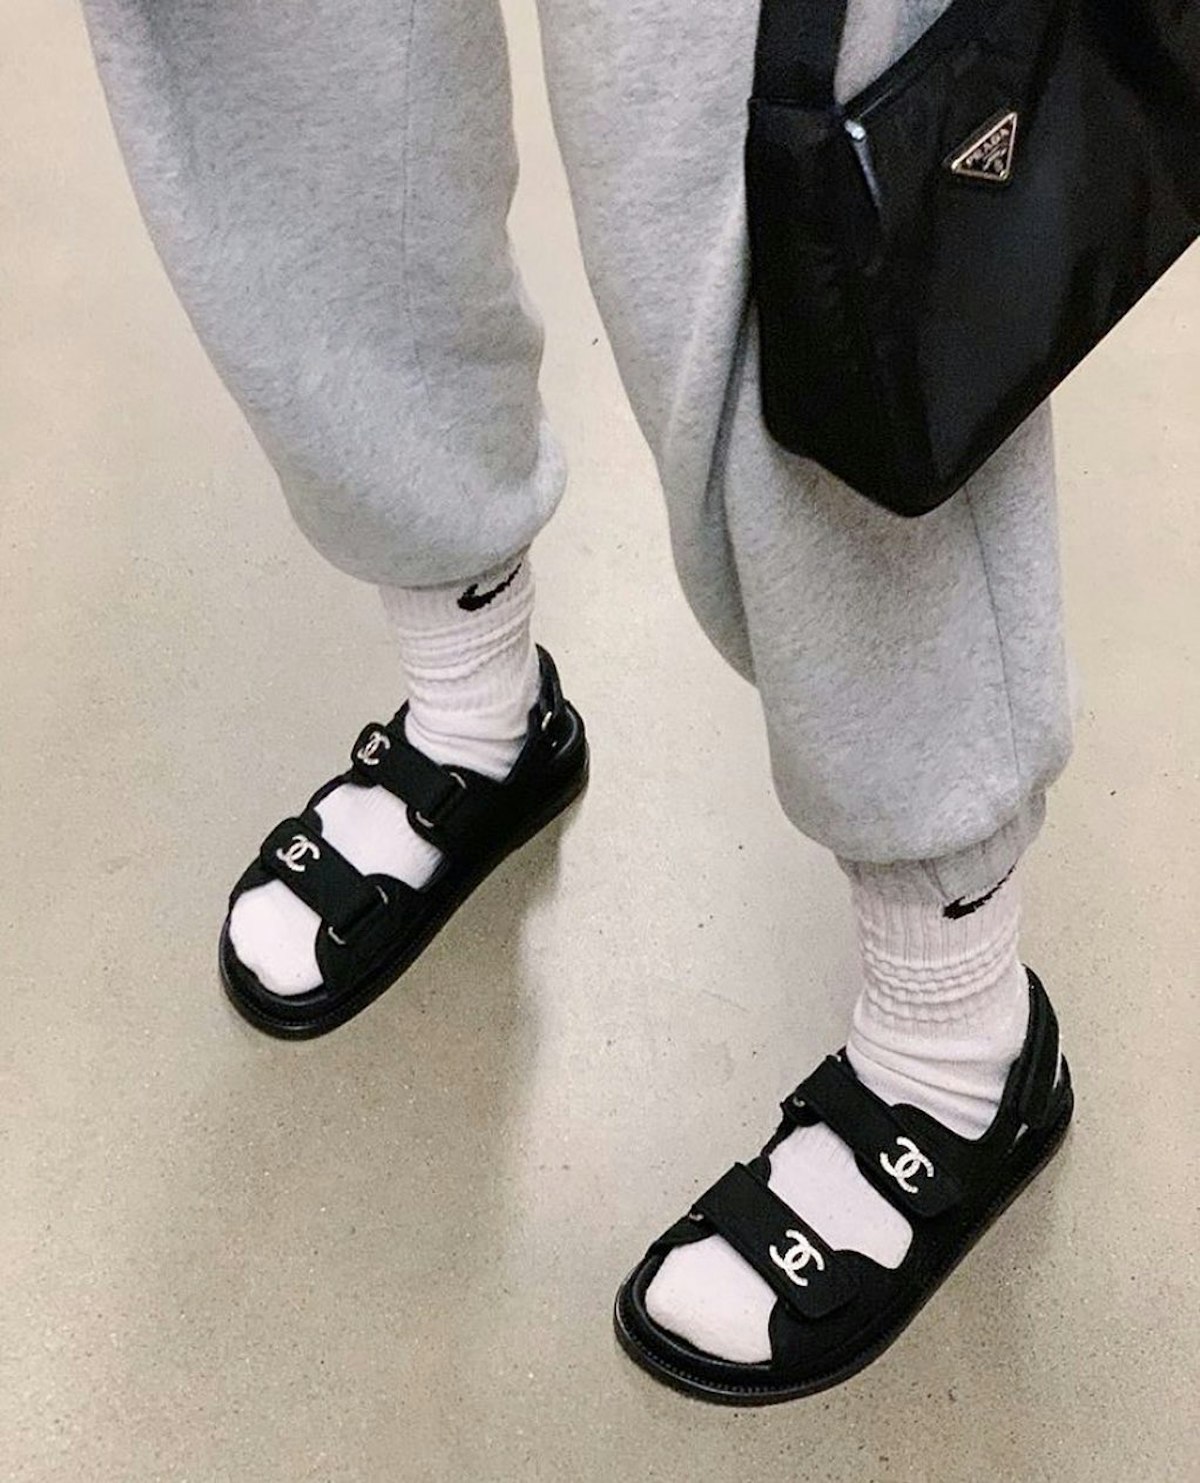 Dad Sandals by Chanel are All the Rage.